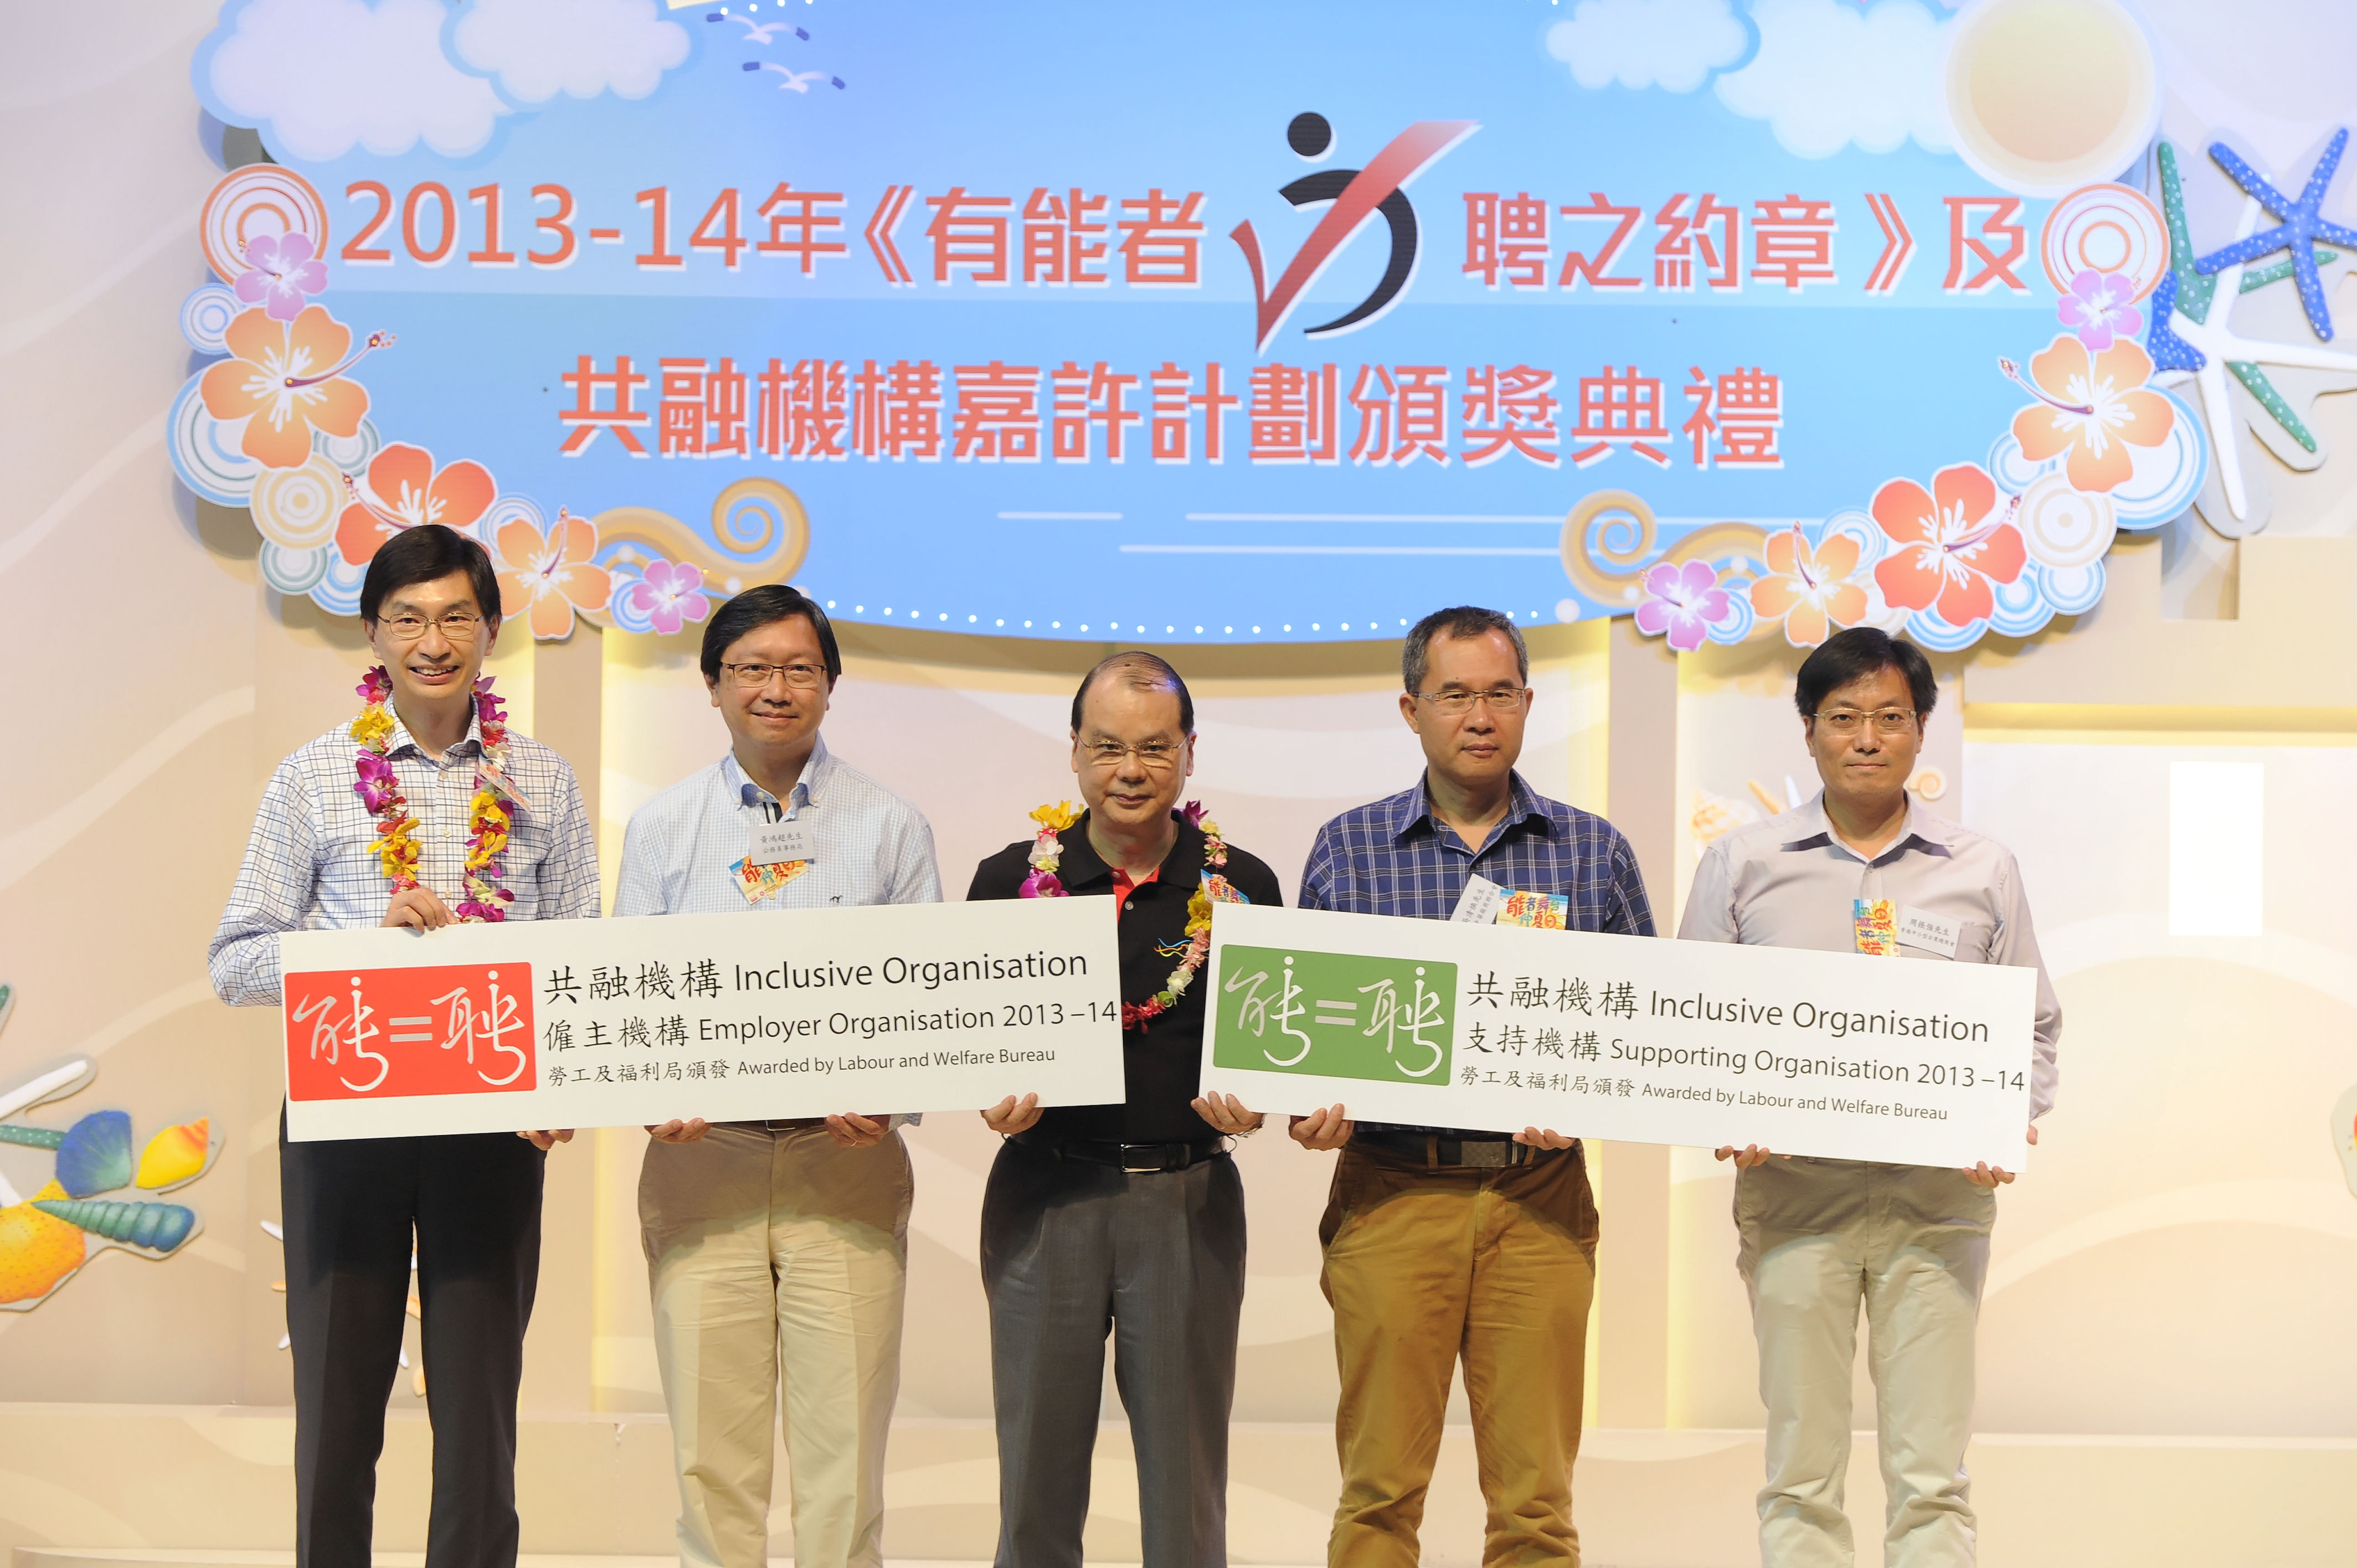 Secretary for Labour and Welfare, Mr. Matthew Cheung Kin-chung, GBS, JP (middle) presented the Inclusive Organisation Logo to representatives of the participating organisations